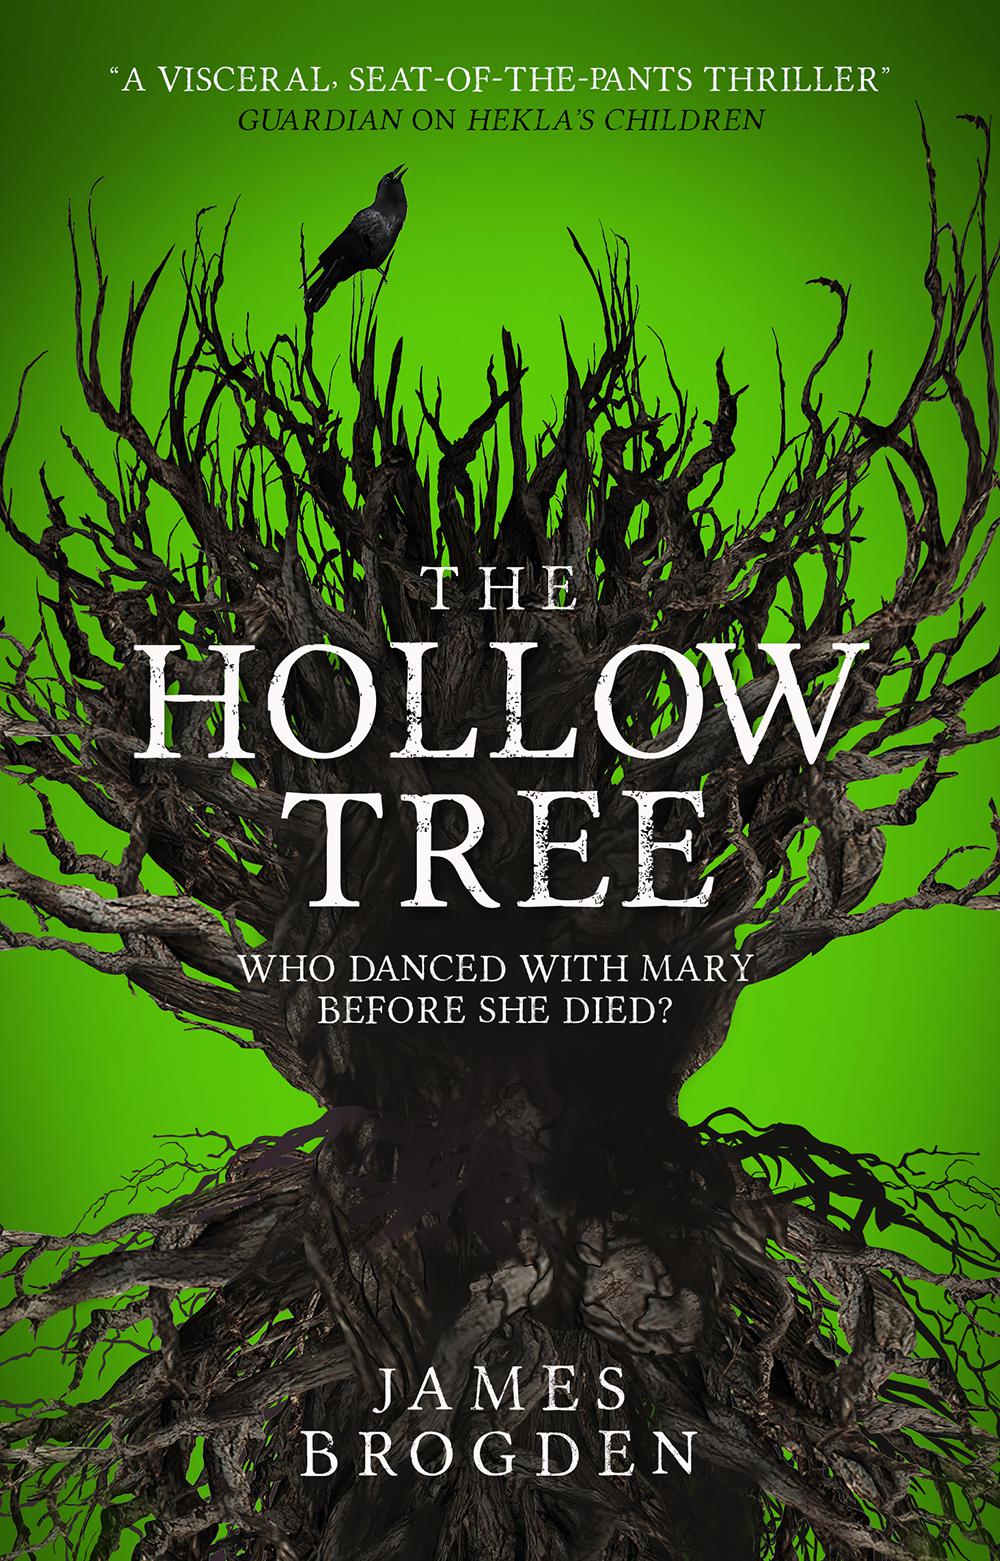 An interview with James Brogden  – Author of The Hollow Tree